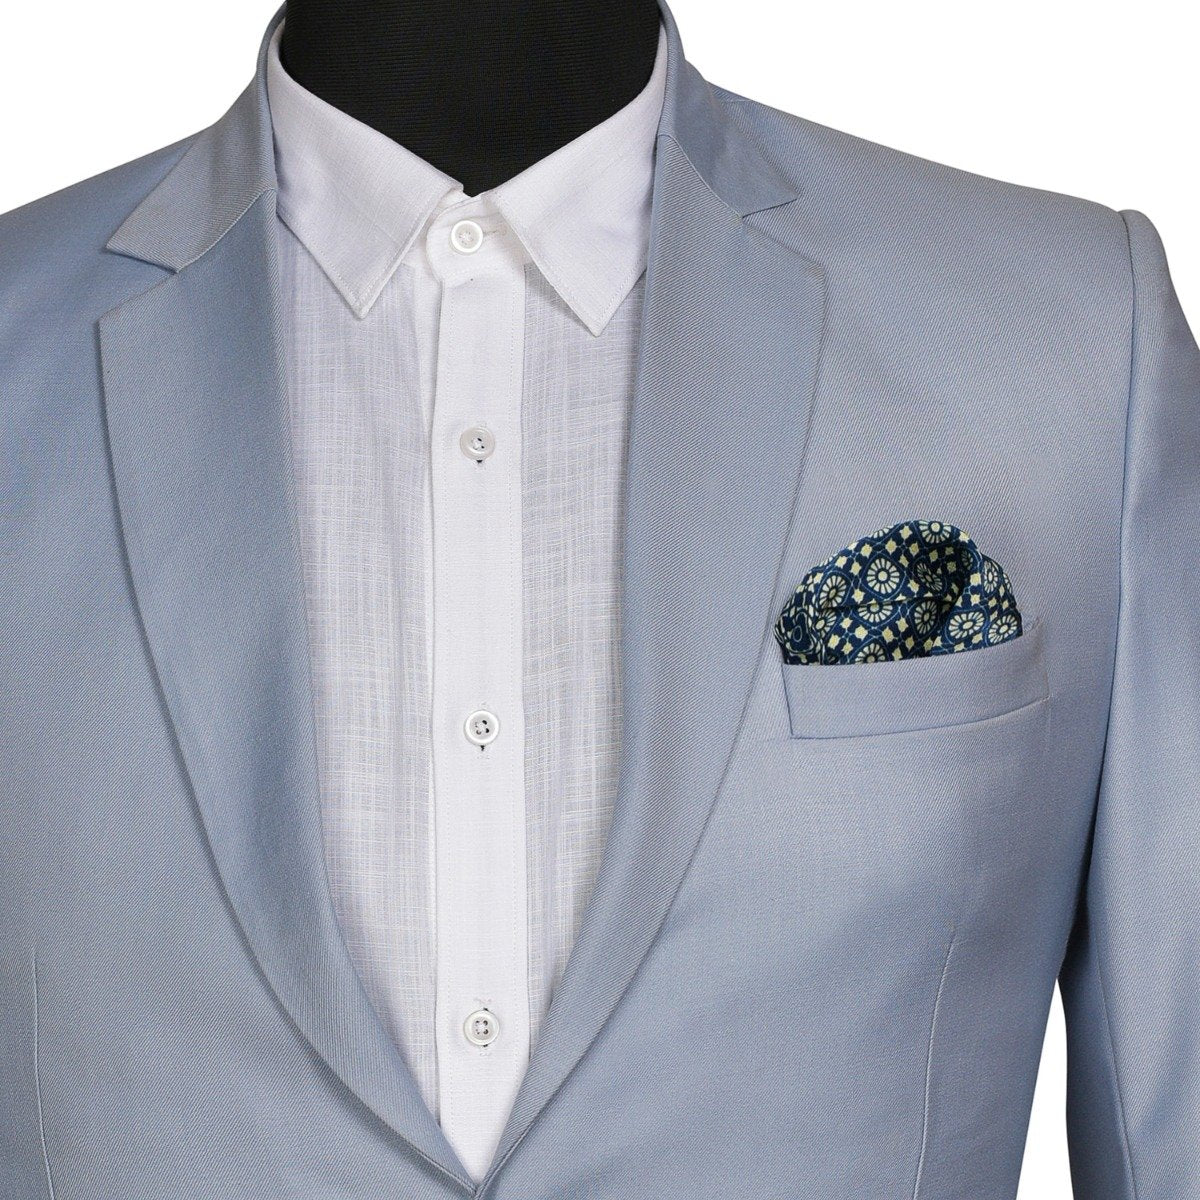 Chokore Blue and White Silk Pocket Square -Indian At Heart line